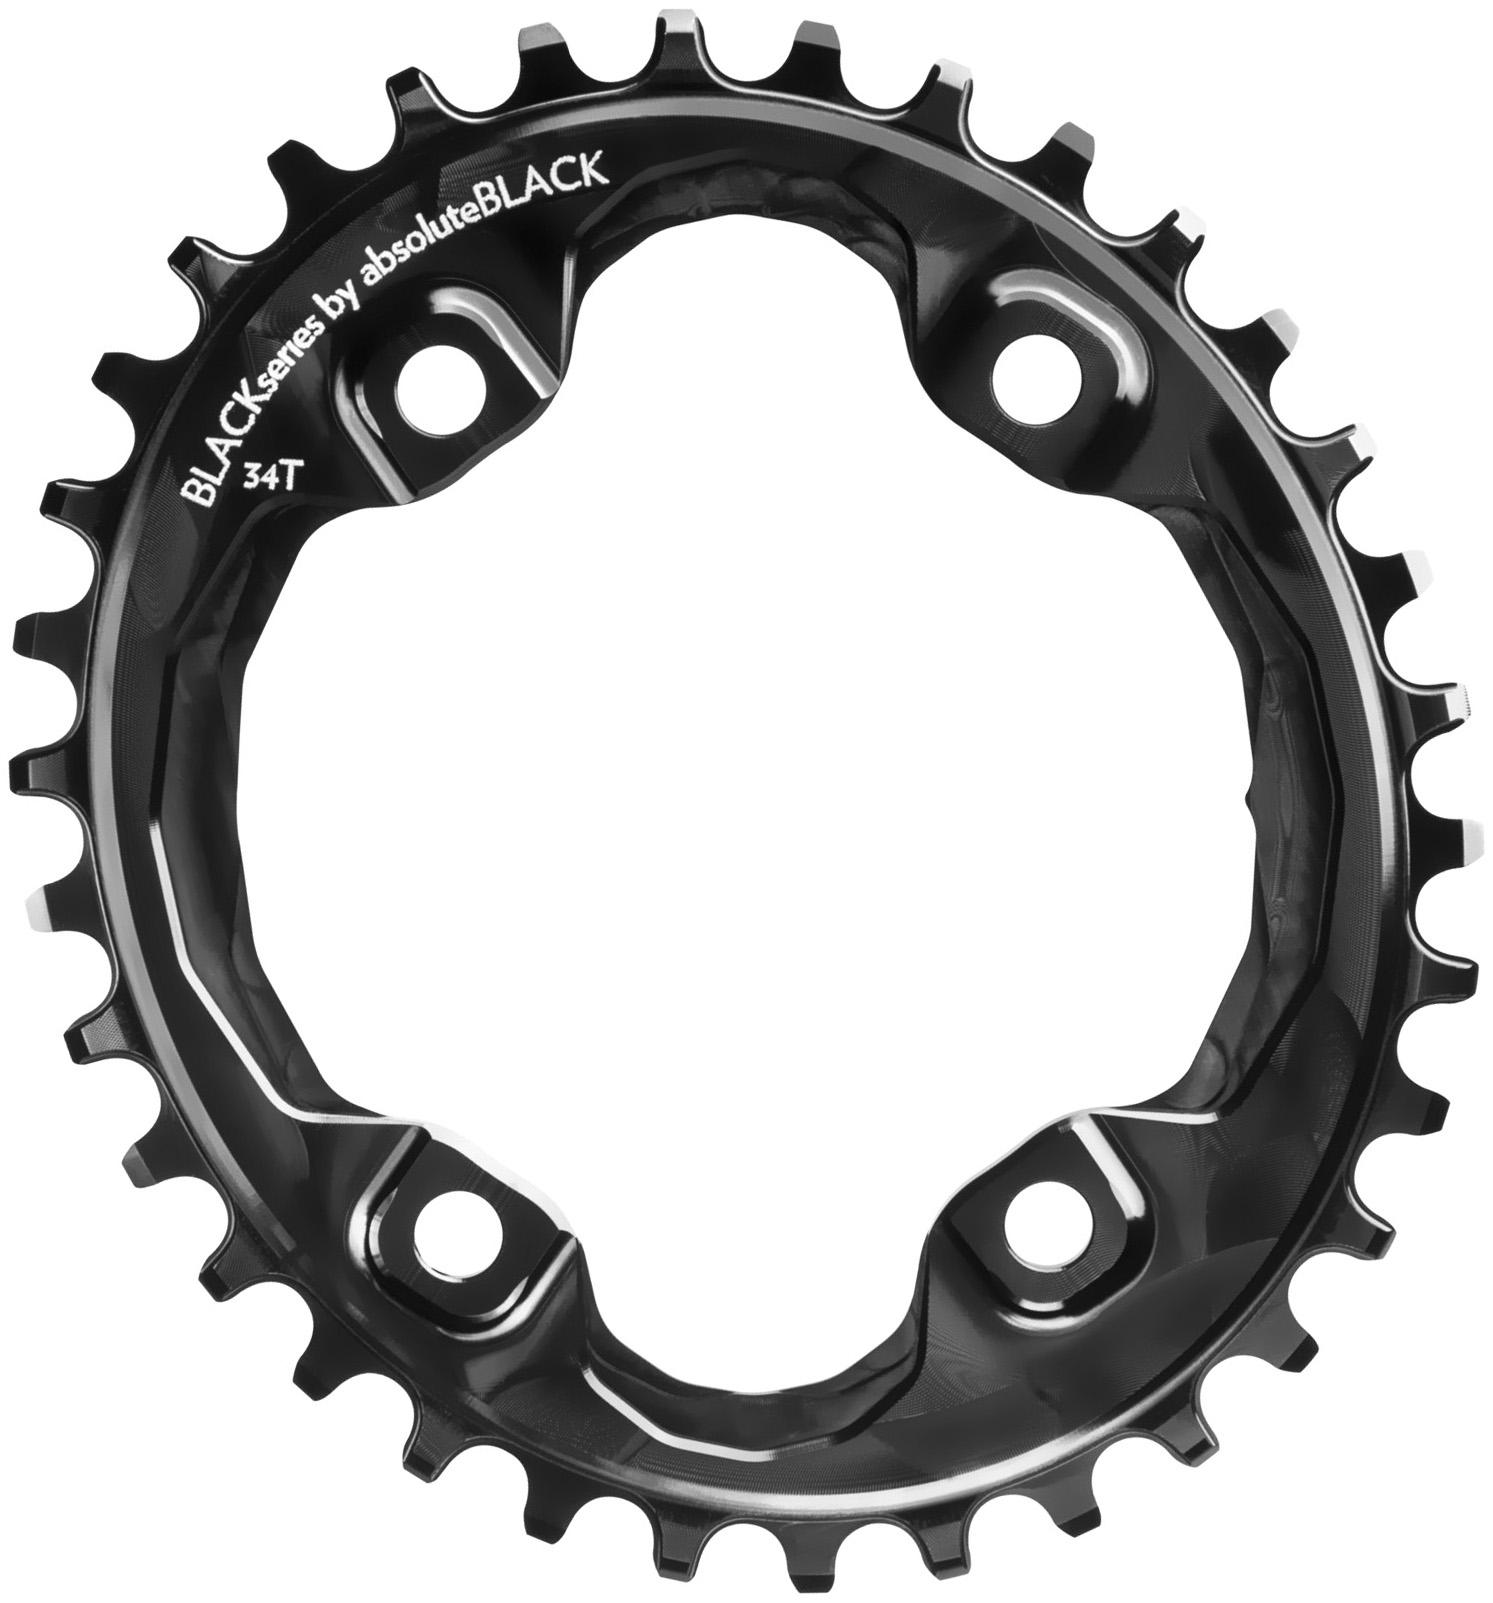 Image of BLACK by Absolutebla Narrow Wide Oval XT M8000 Chainring